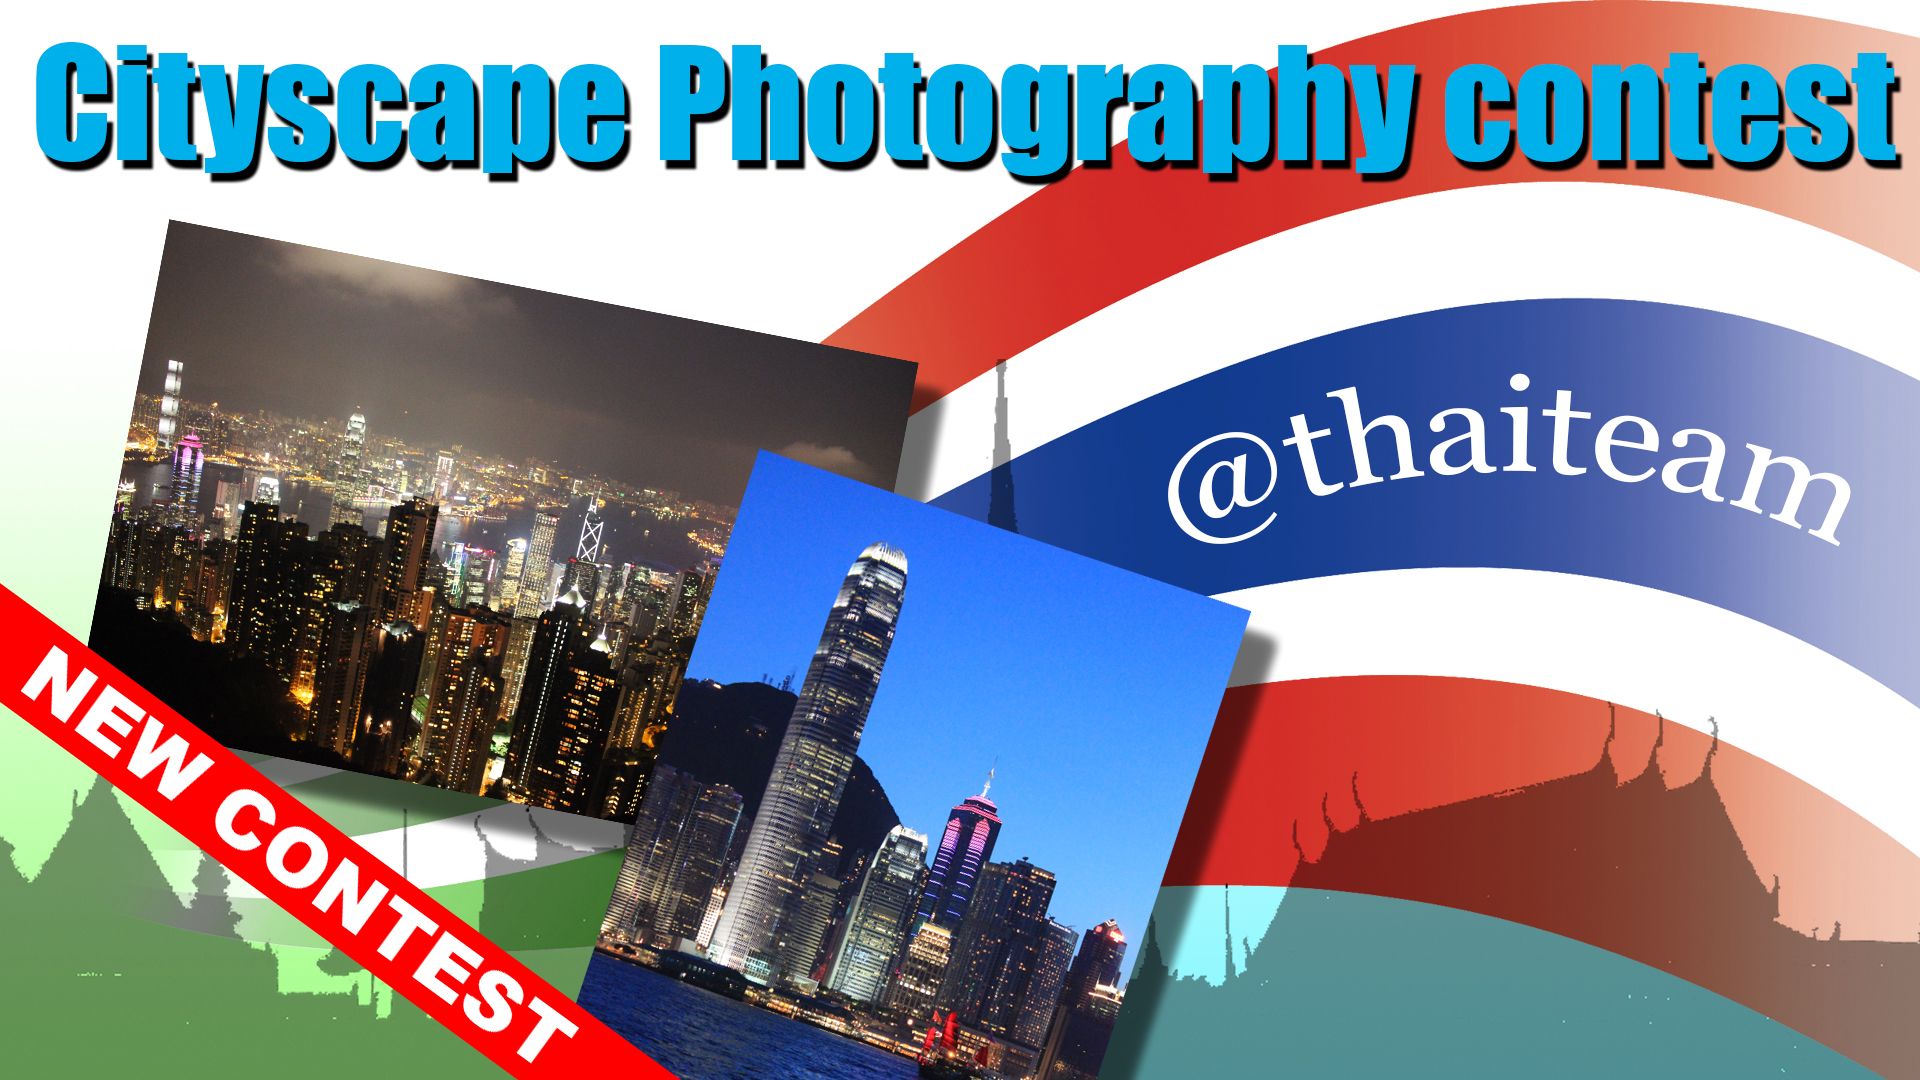 New Contest cityscape Photography.jpg